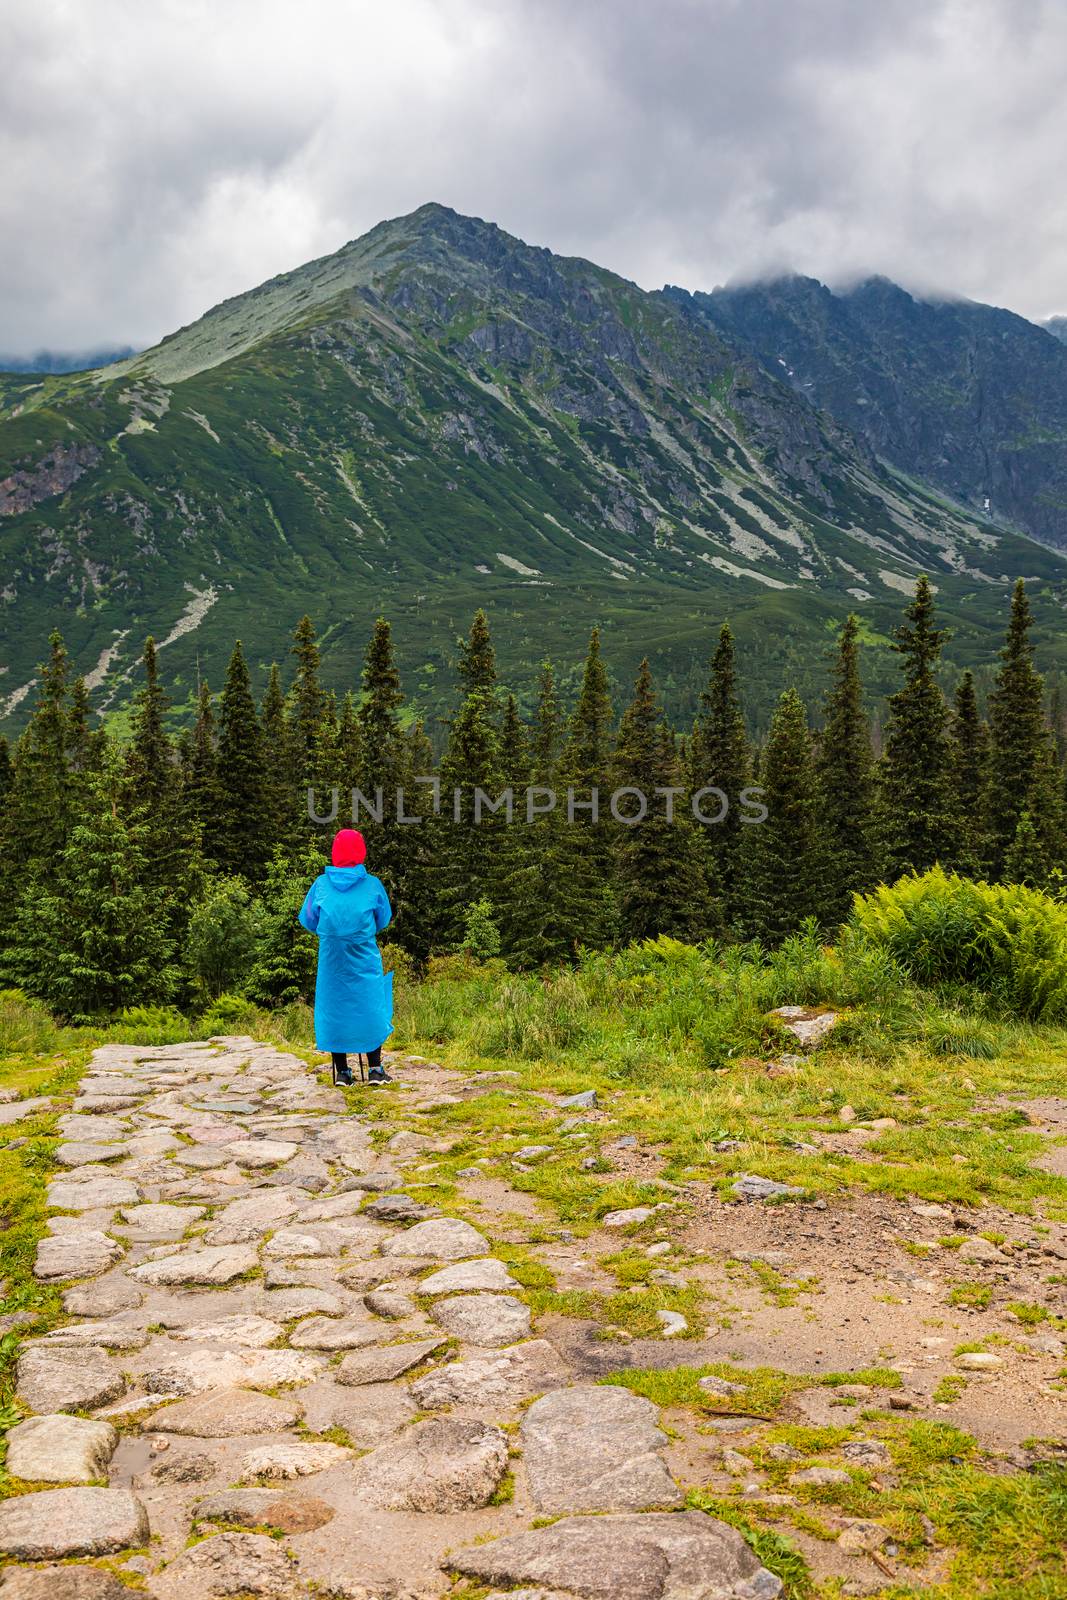 Hikker in a plastic raincoat walking in Tatra mountains, Poland in bad weather - portrait orientation